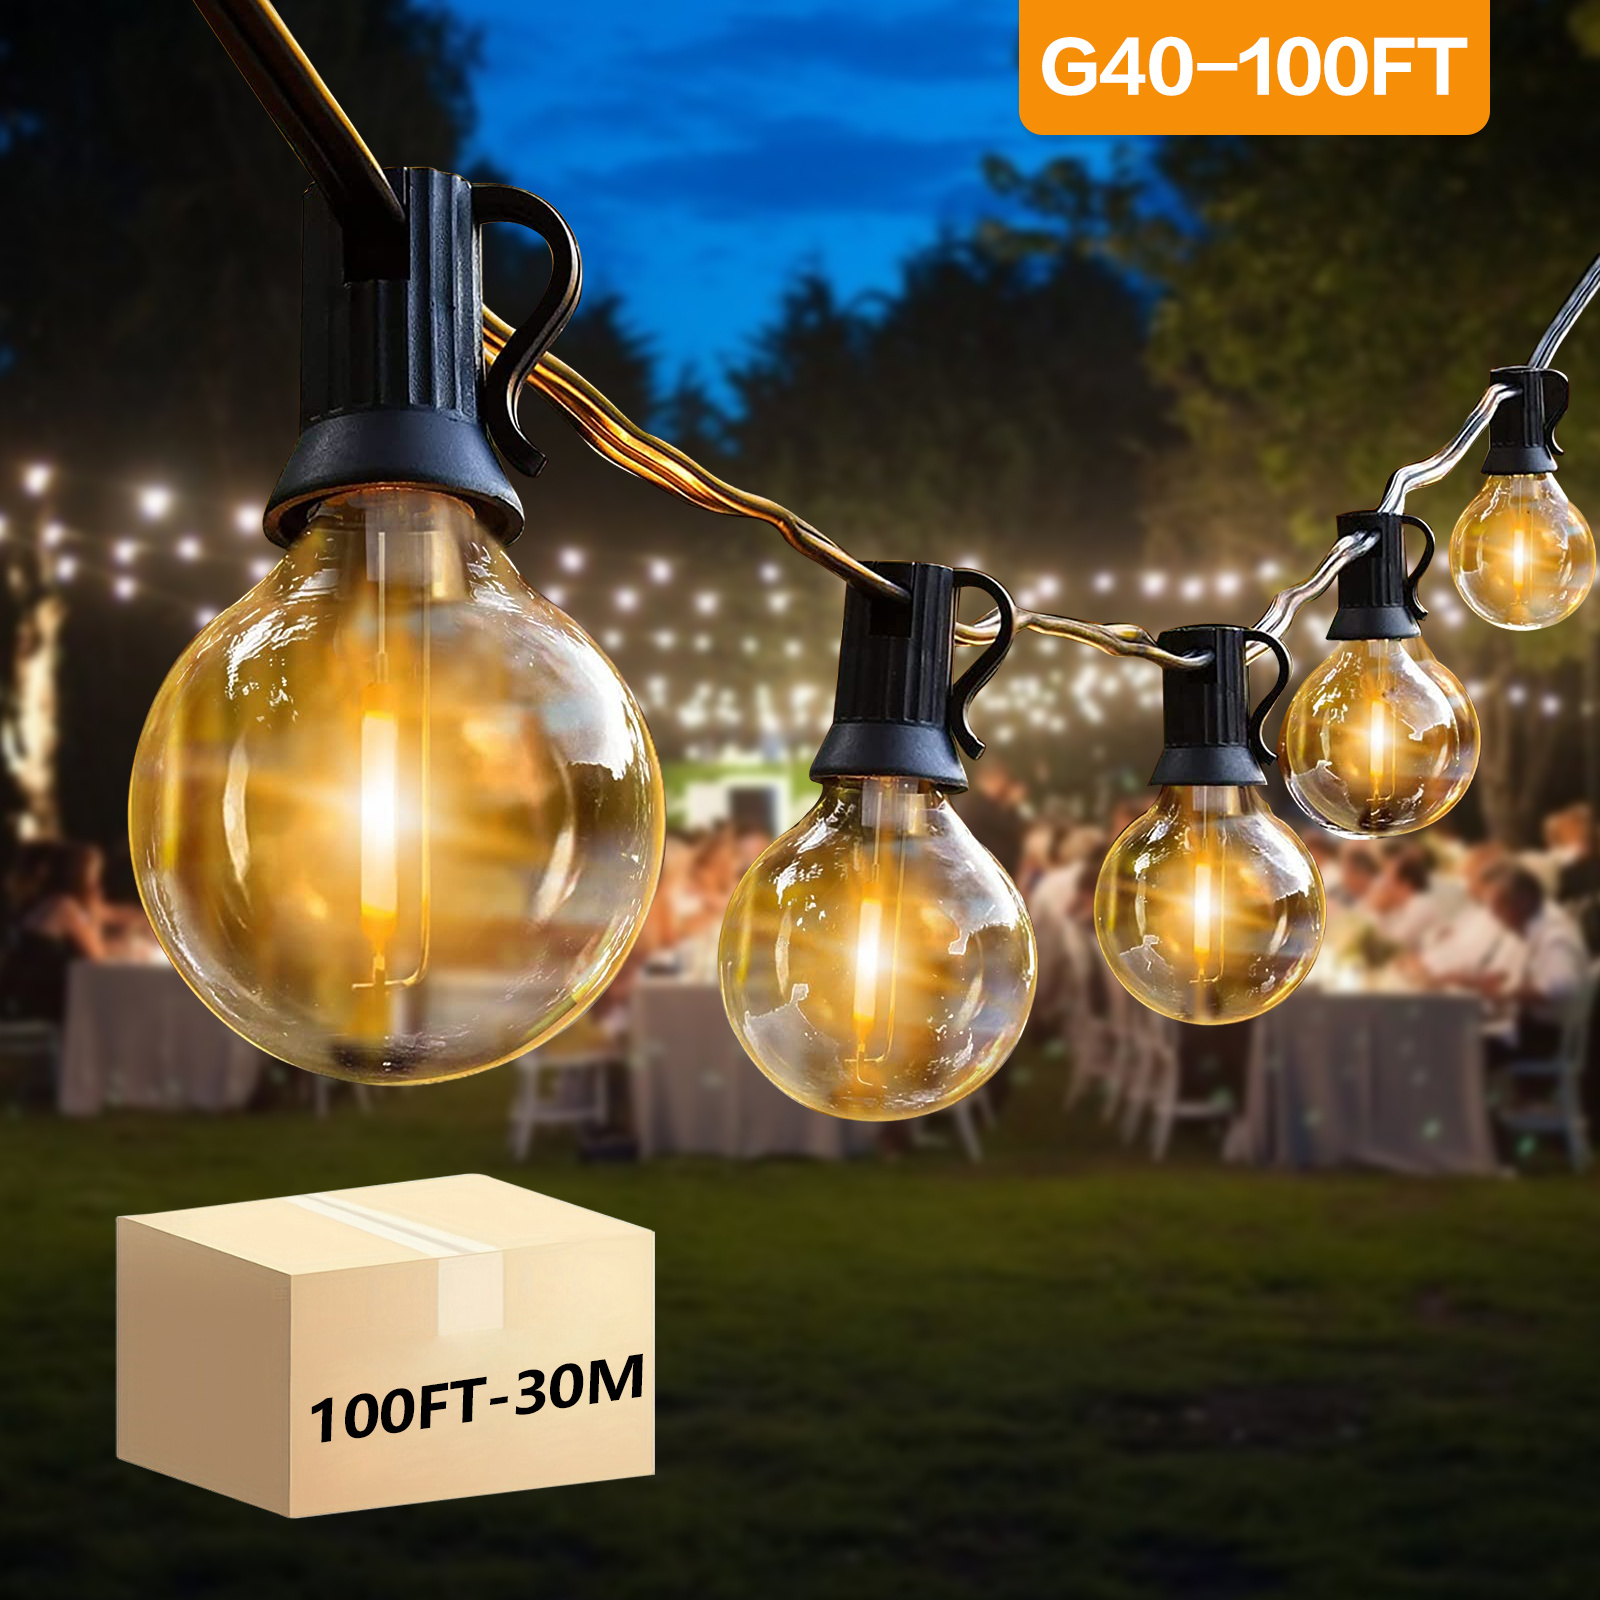 

100ft G40 Spherical Light String, Led50 Shatter-proof Edison Light Bulbs, Connected To The Courtyard, Outdoor, Coffee Shop, Backyard Light String, Warm Color Can Be Connected, Warm And Romantic